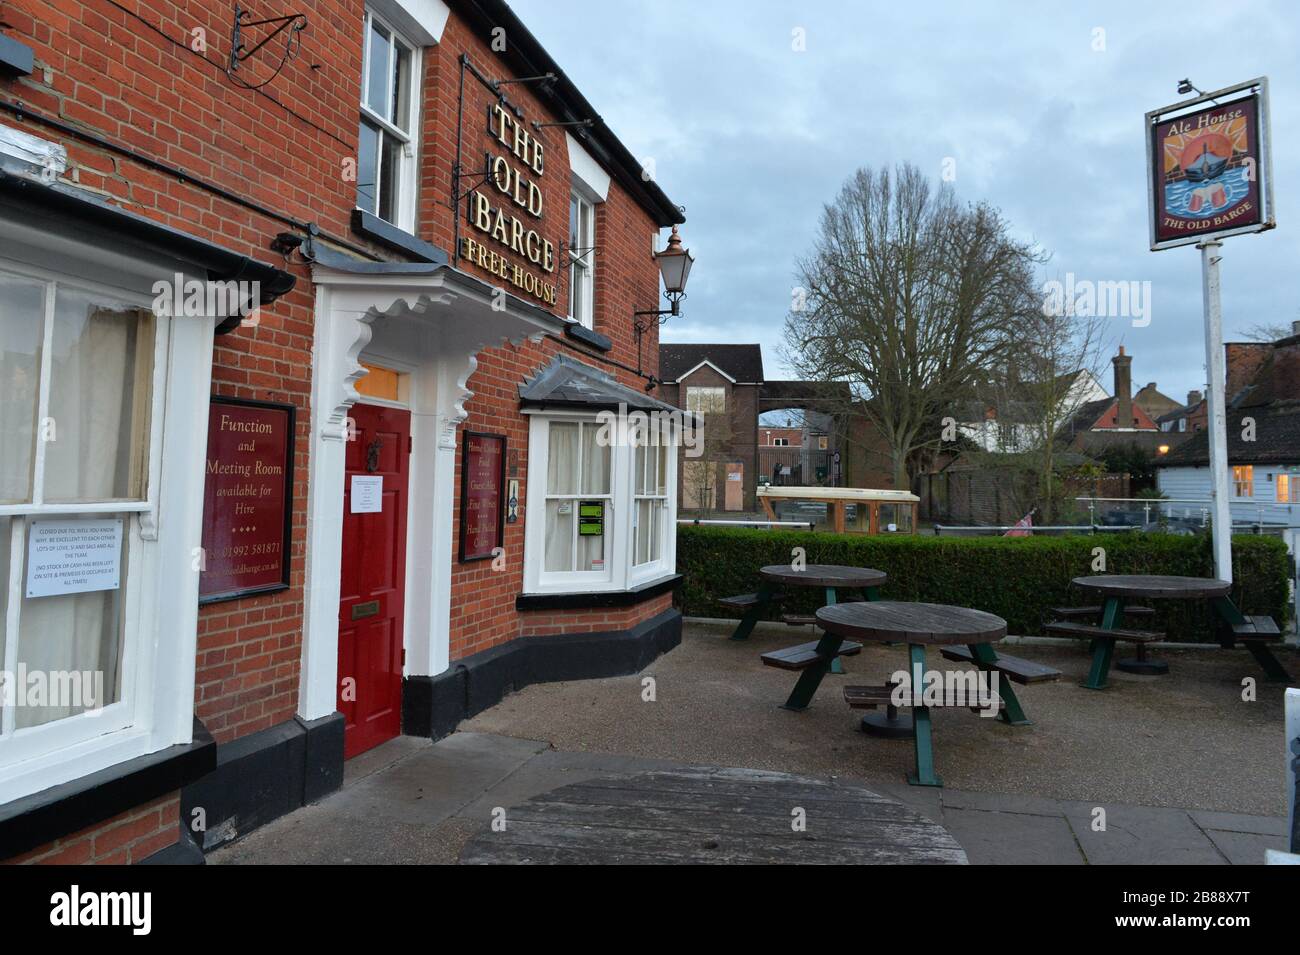 Hertford, UK. 20th Mar, 2020. Boris Johnson has announced that all cafes, pubs, pubs and restaurants are to close to help prevent spread of coronavirus. The Old Barge pub has closed during the virus outbreak. Credit: Andrew Steven Graham/Alamy Live News Stock Photo